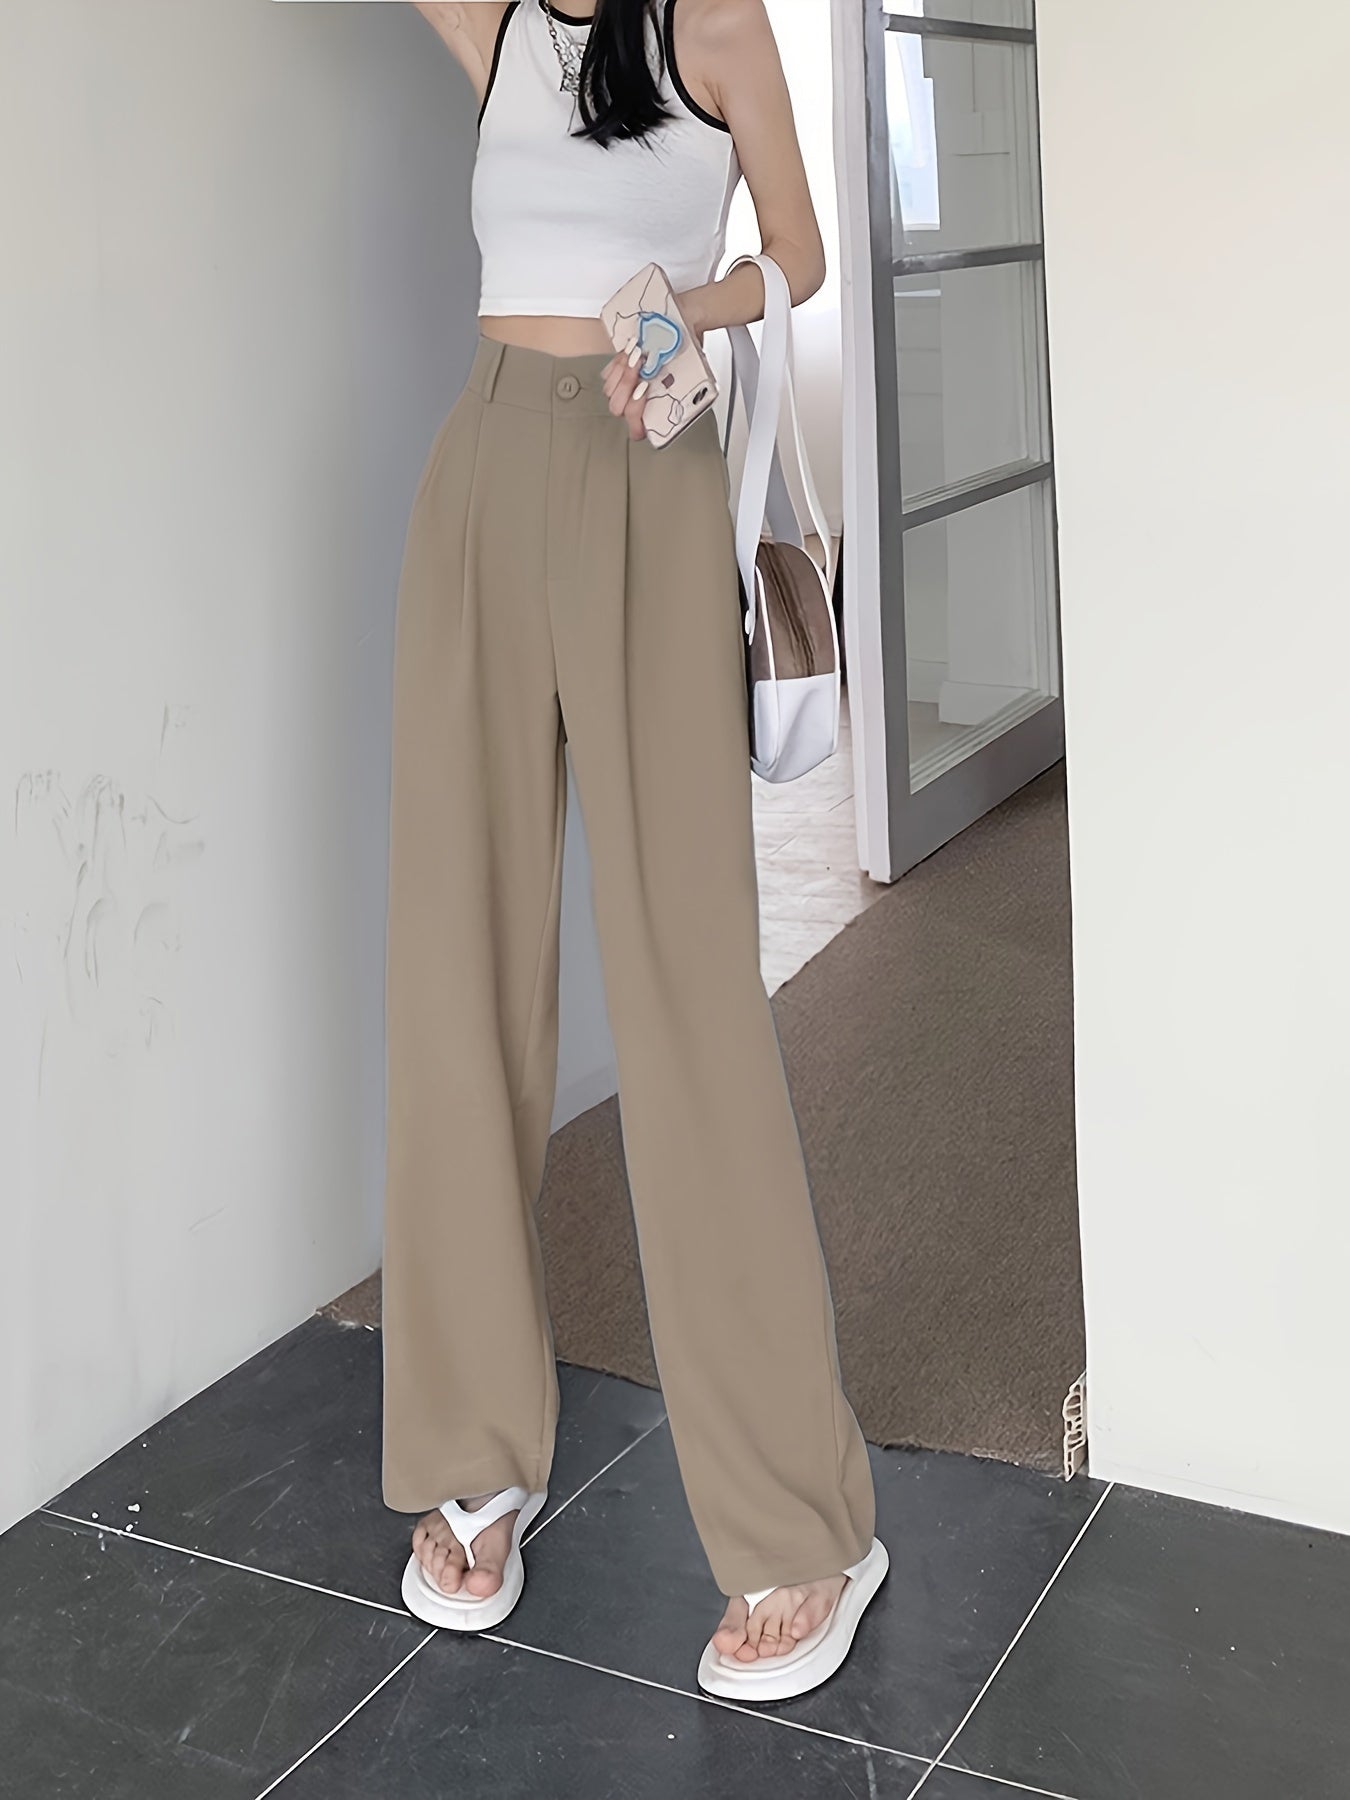 Antmvs Solid Draped Straight Leg Pants, Casual High Waist Loose Suit Pants, Women's Clothing